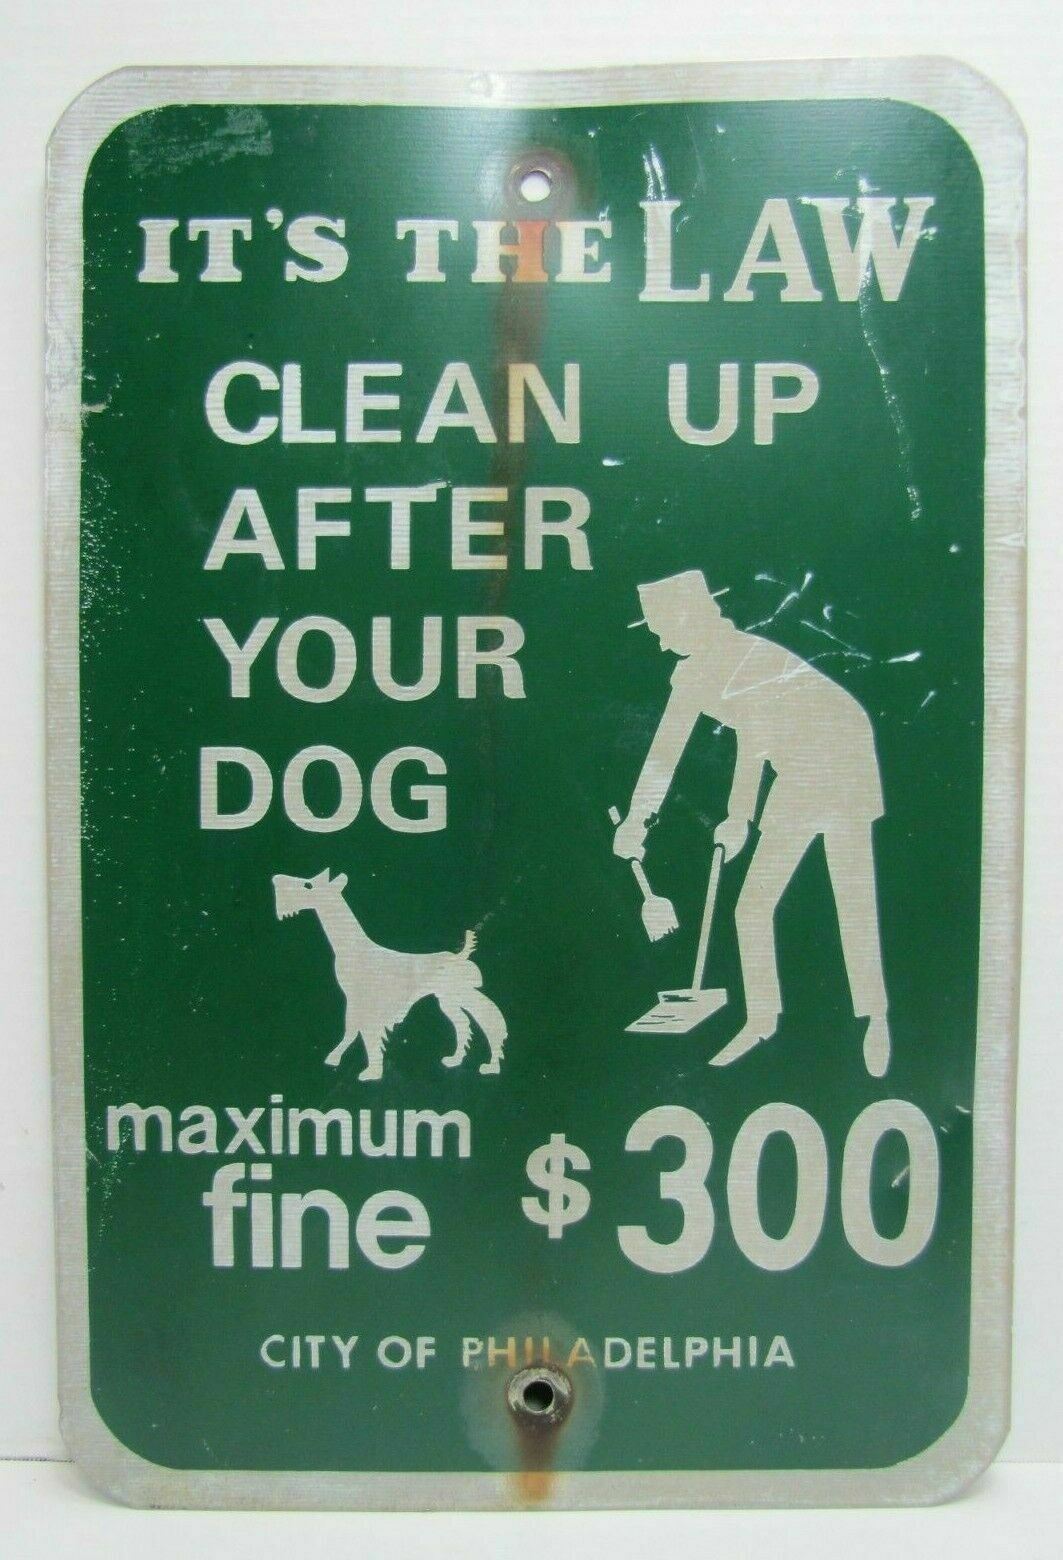 CLEAN UP AFTER YOUR DOG IT'S THE LAW CITY OF PHILA $300 FINE Retired Sign